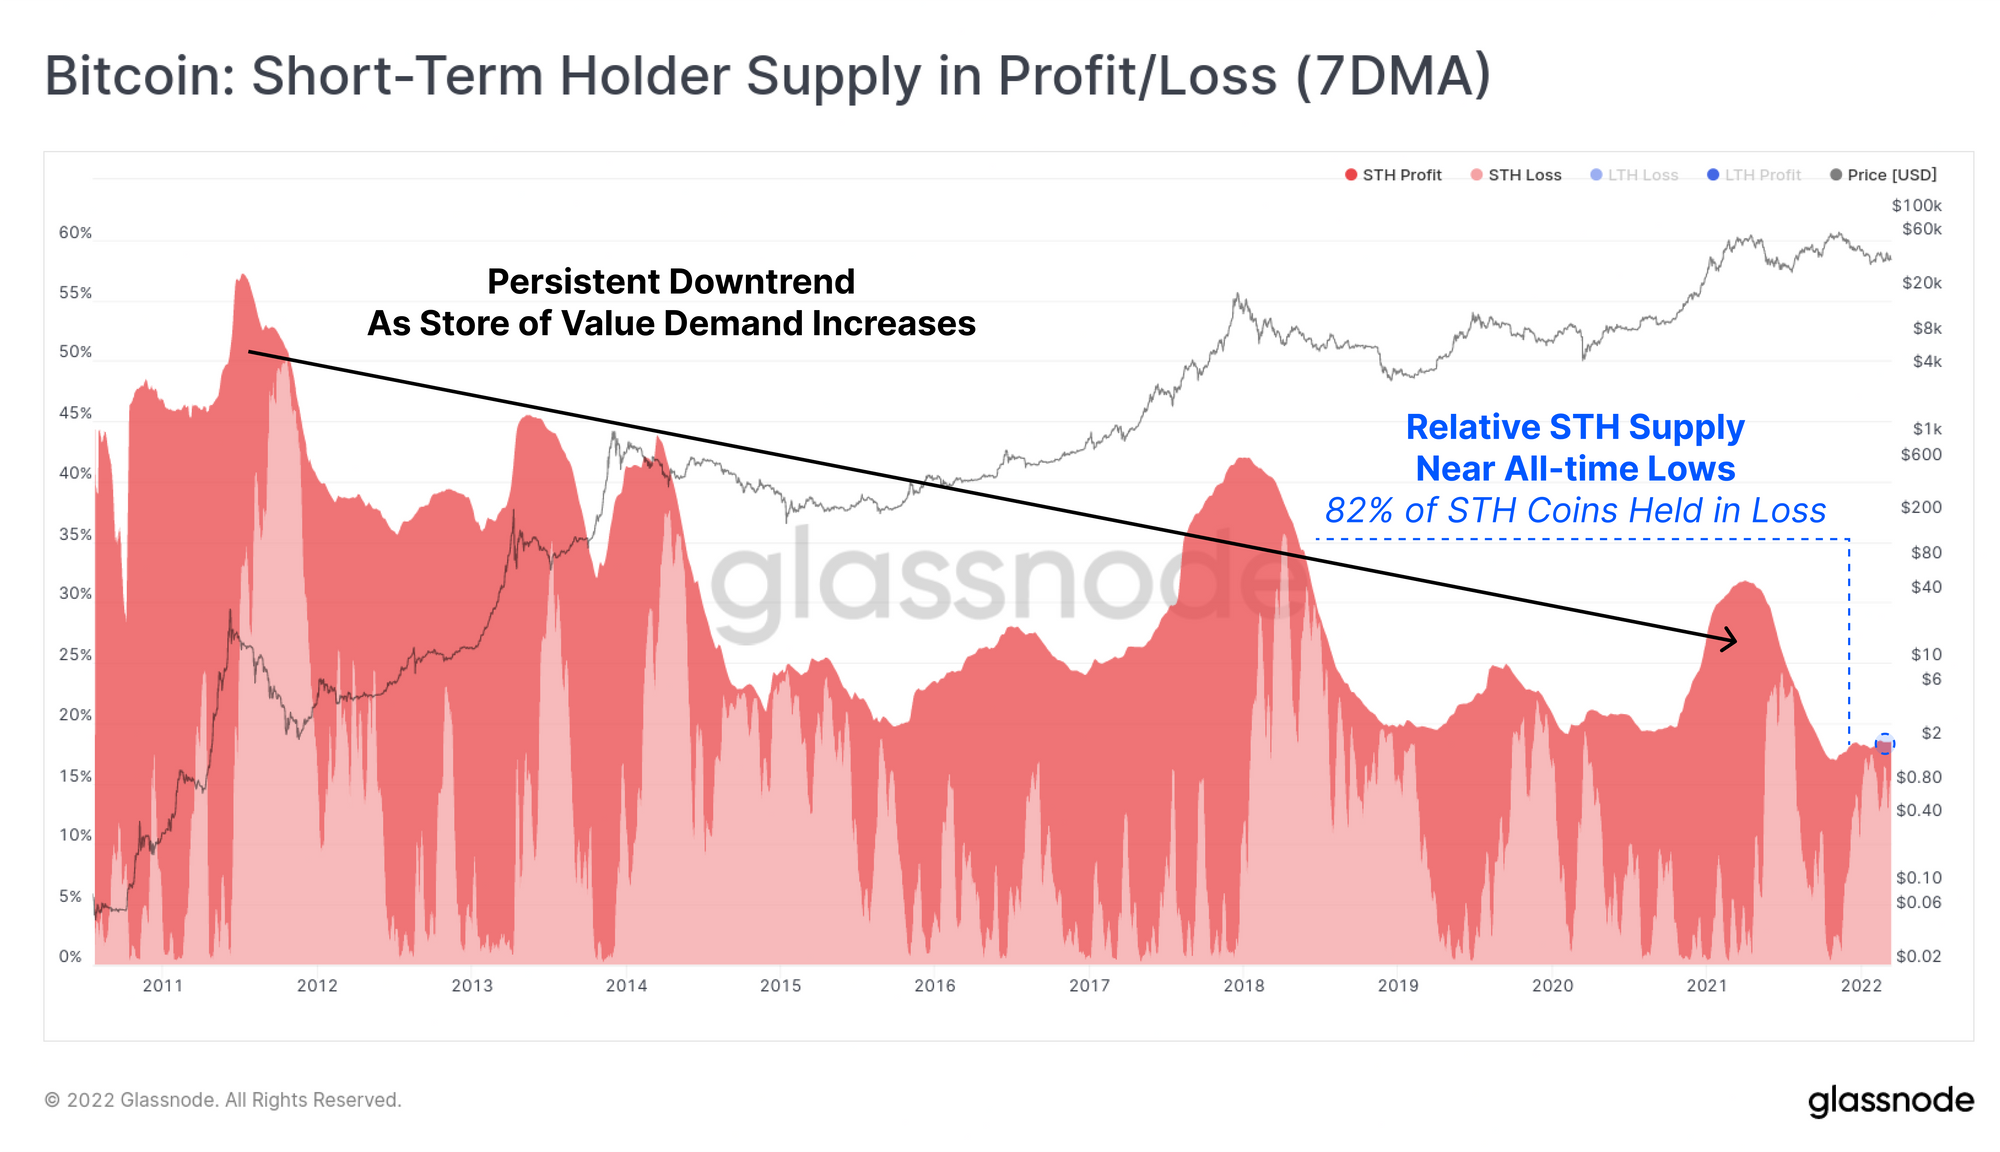 82% Of Bitcoin Short-Term Holder Supply Now In Loss, Capitulation Ahead?